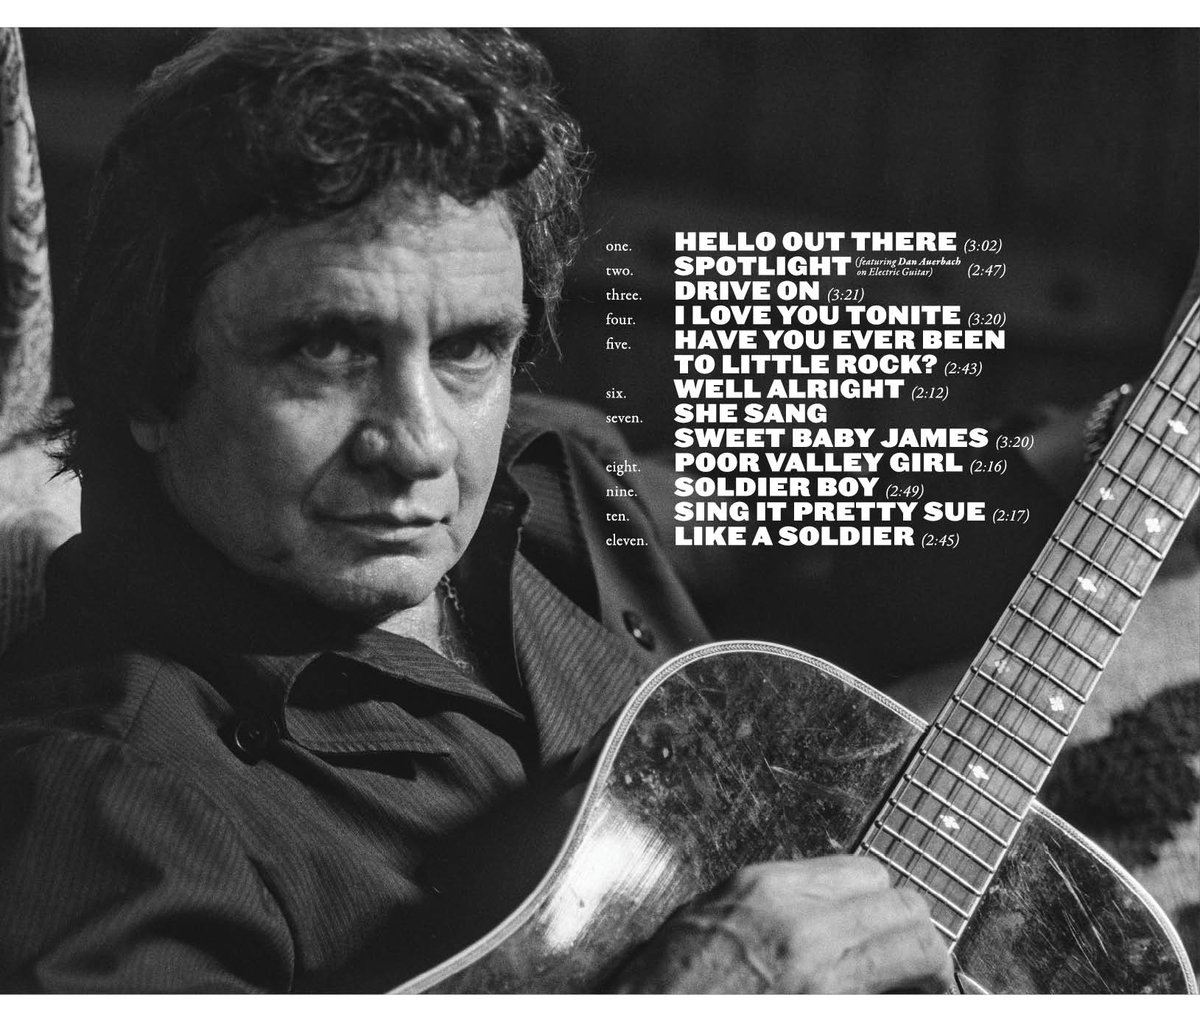 Johnny Cash’s new album ‘Songwriter’ highlights the heart of his storytelling across all 11 tracks solely written by Cash and recorded by him in 1993. Pre-order the album now: johnnycash.lnk.to/Songwriter 🖤